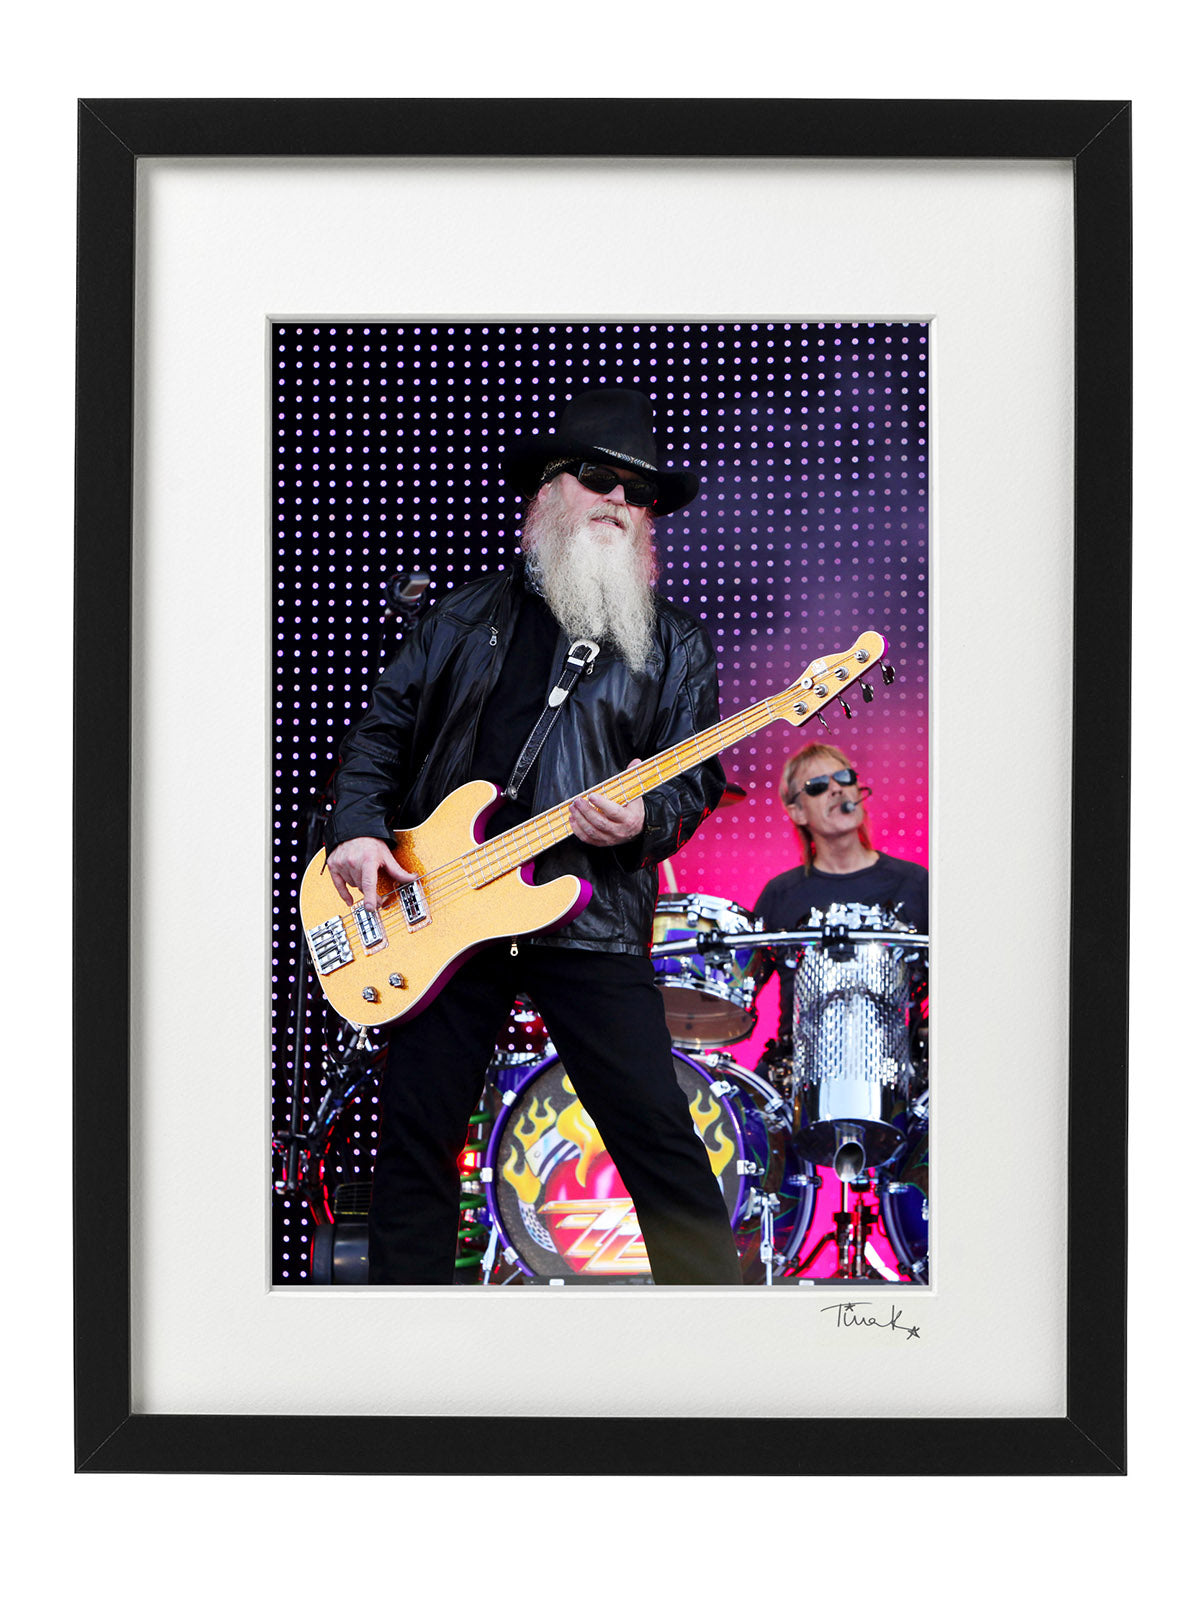 Dusty Hill of ZZ Top with bass guitar and black hat on stage at Download Festival 2009, Frank Beard drumming in background. Original framed print, signed by Tina K Photography.